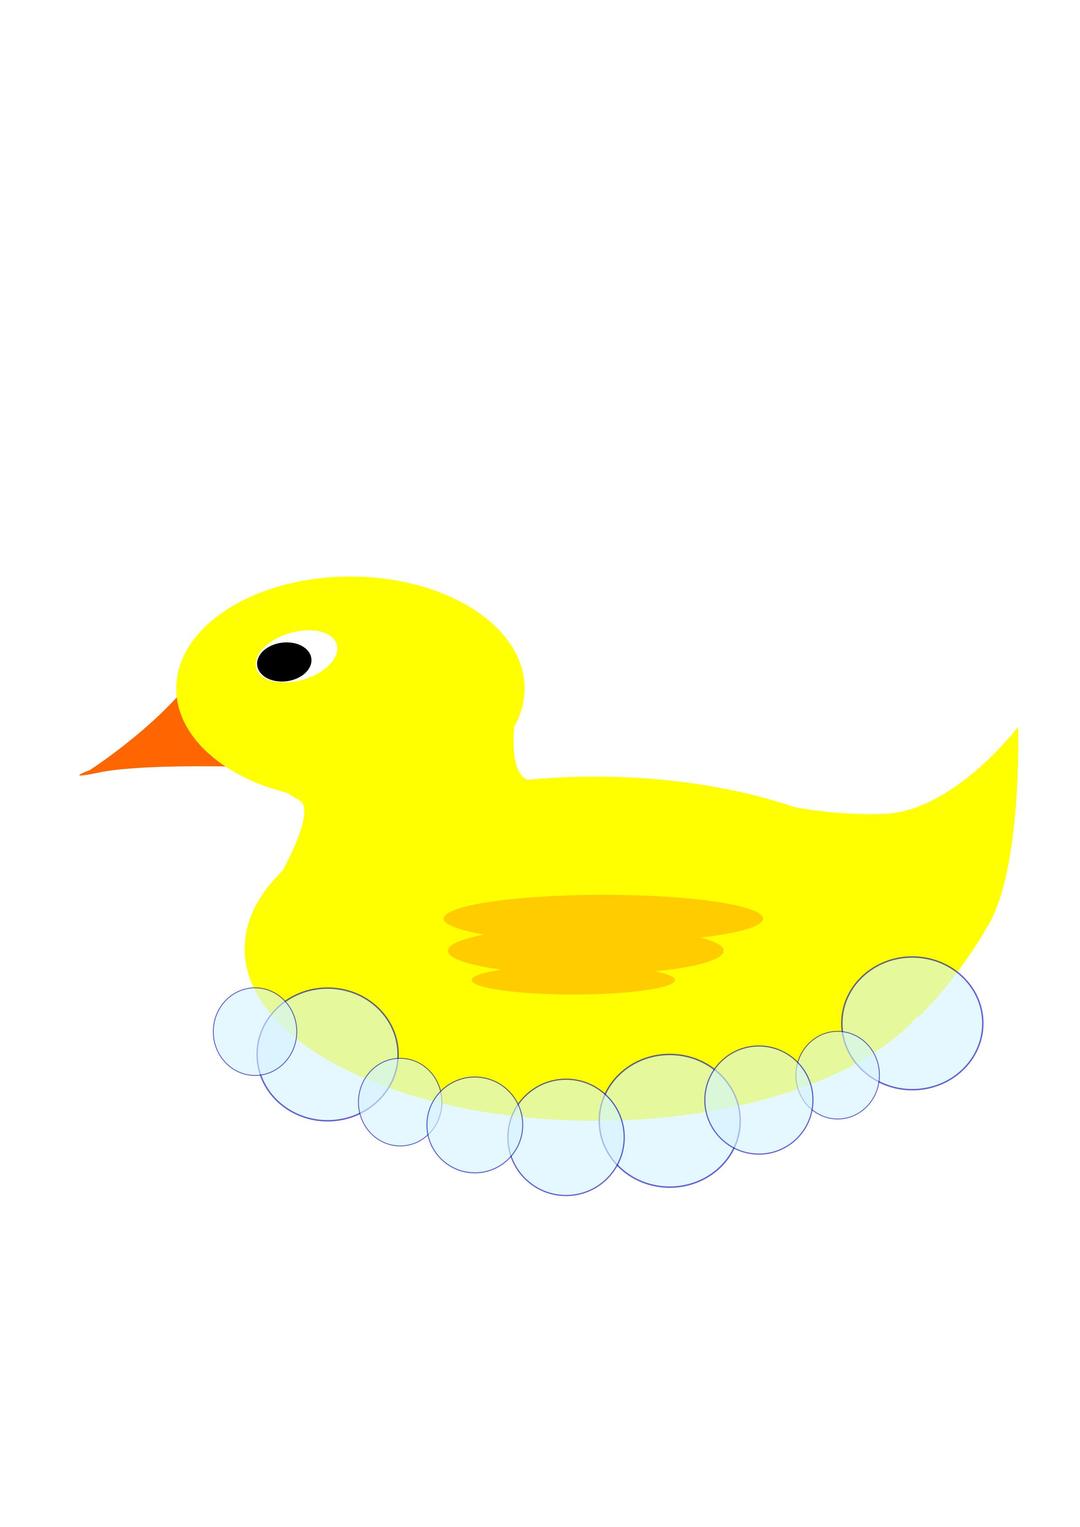 Rubber Ducky in bubbles png transparent